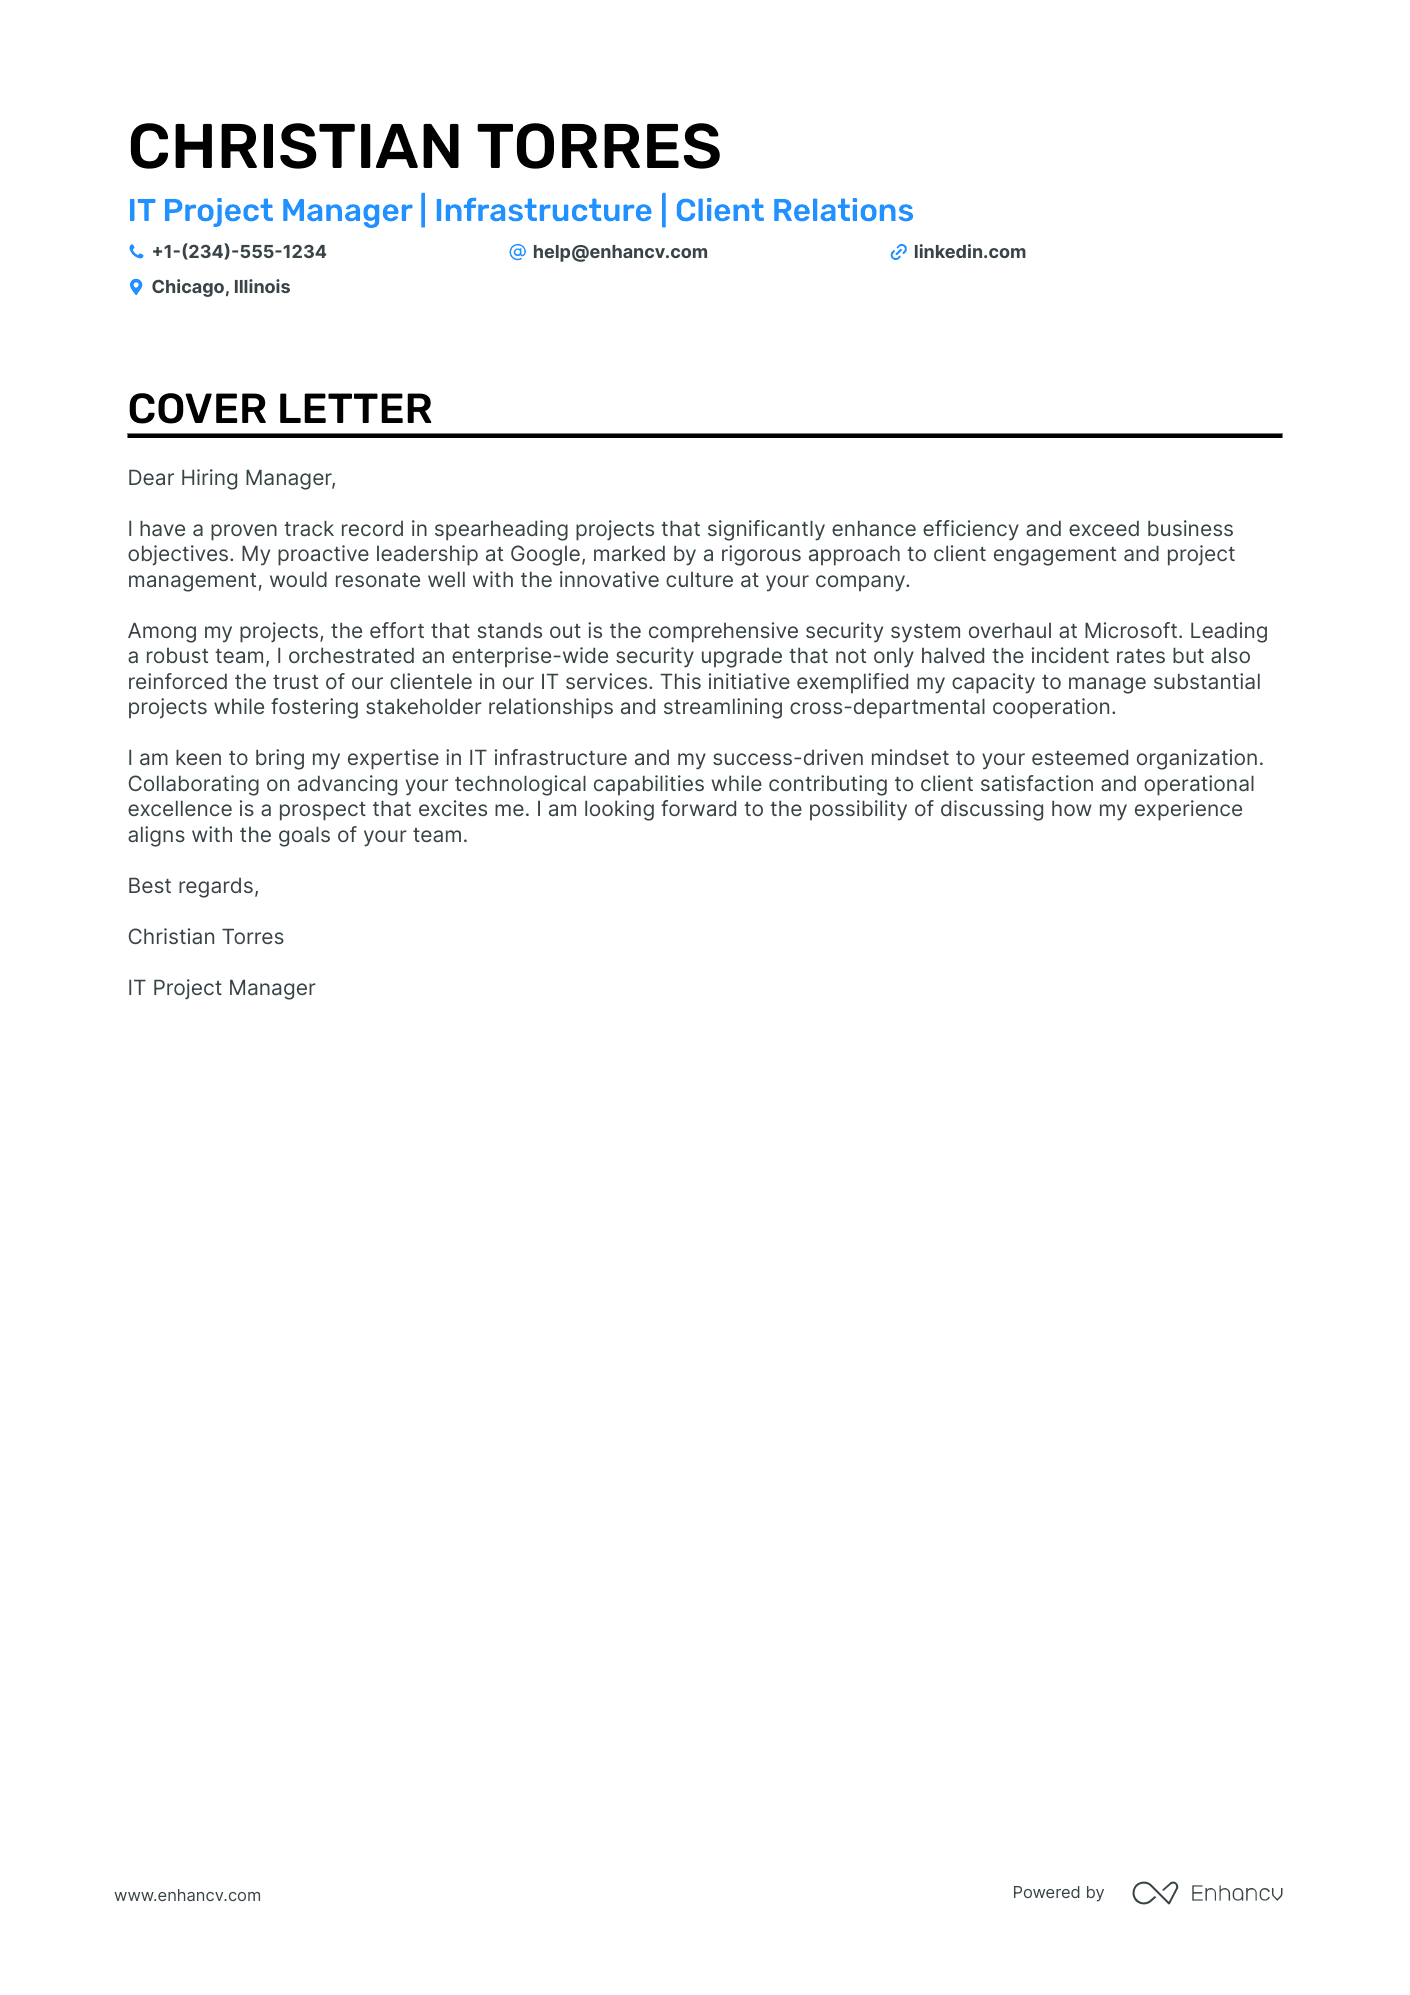 Infrastructure Project Manager cover letter